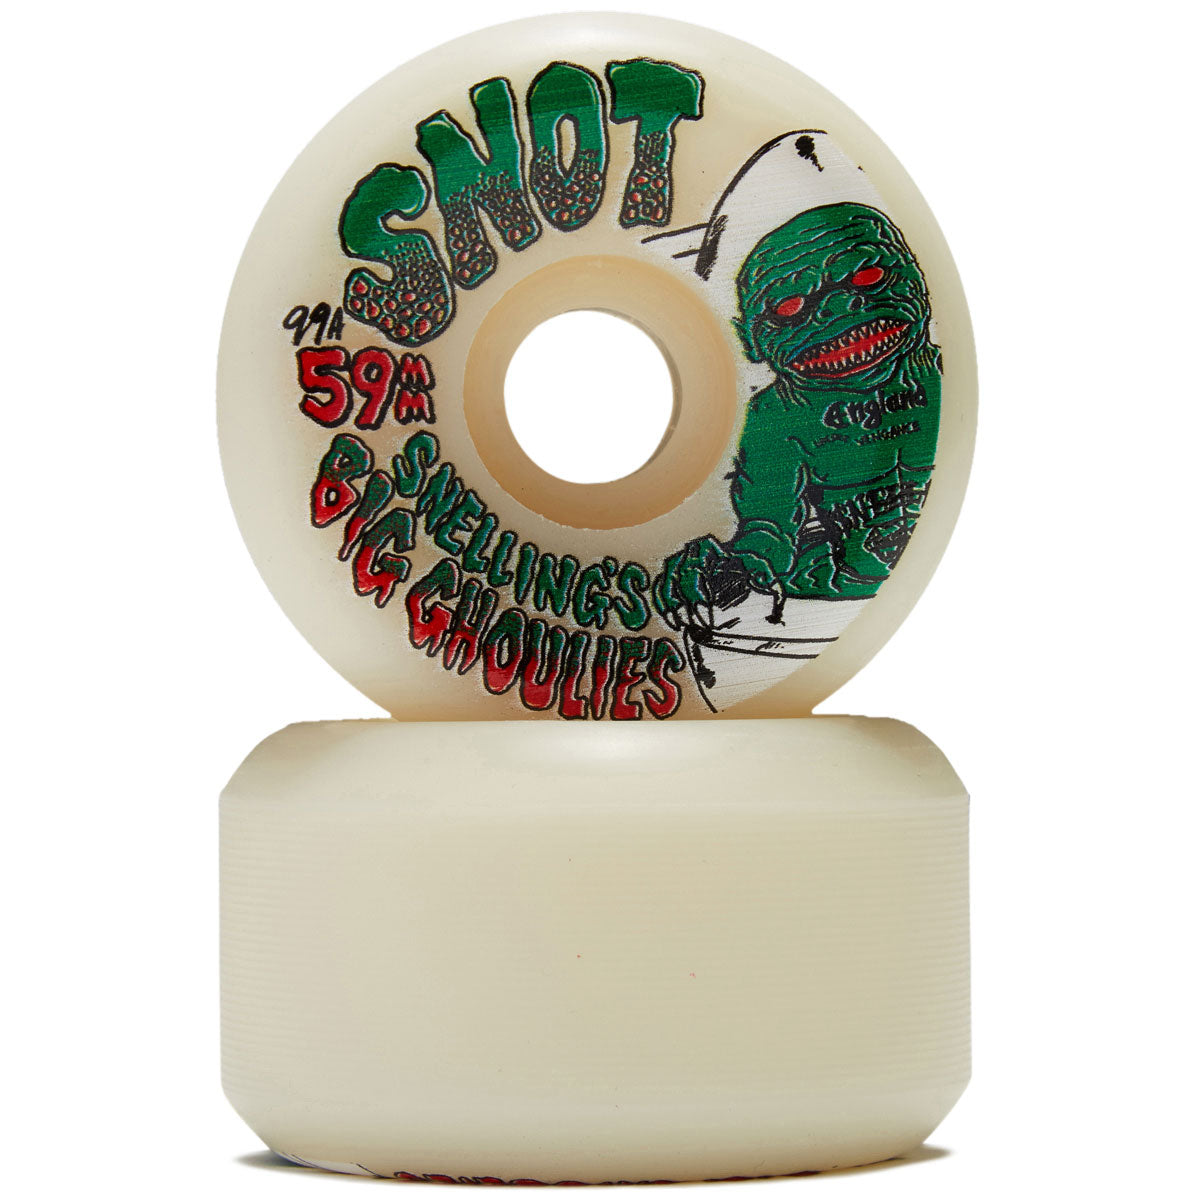 Snot Snelling Big Ghoulies 99a Skateboard Wheels - Glow In The Dark - 59mm image 2